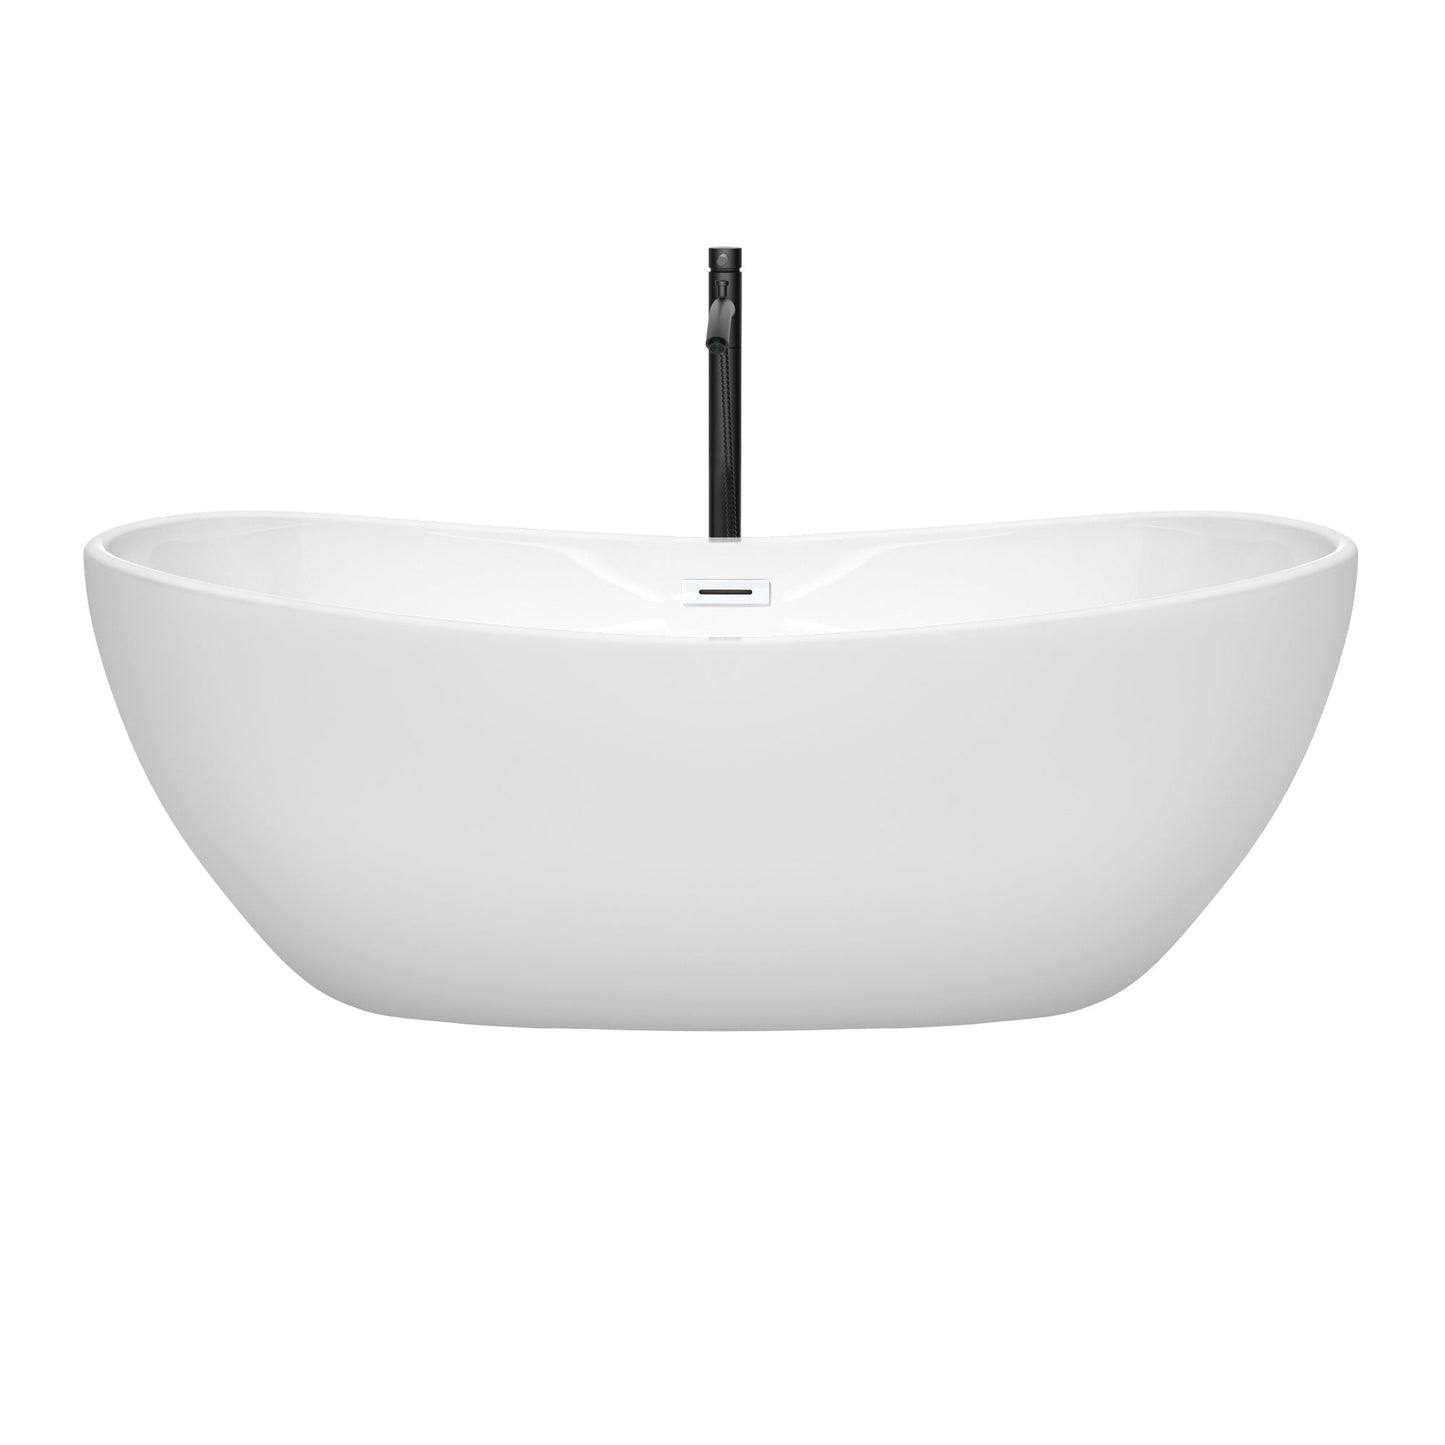 Wyndham Collection Rebecca 65" Freestanding Bathtub in White With Shiny White Trim and Floor Mounted Faucet in Matte Black